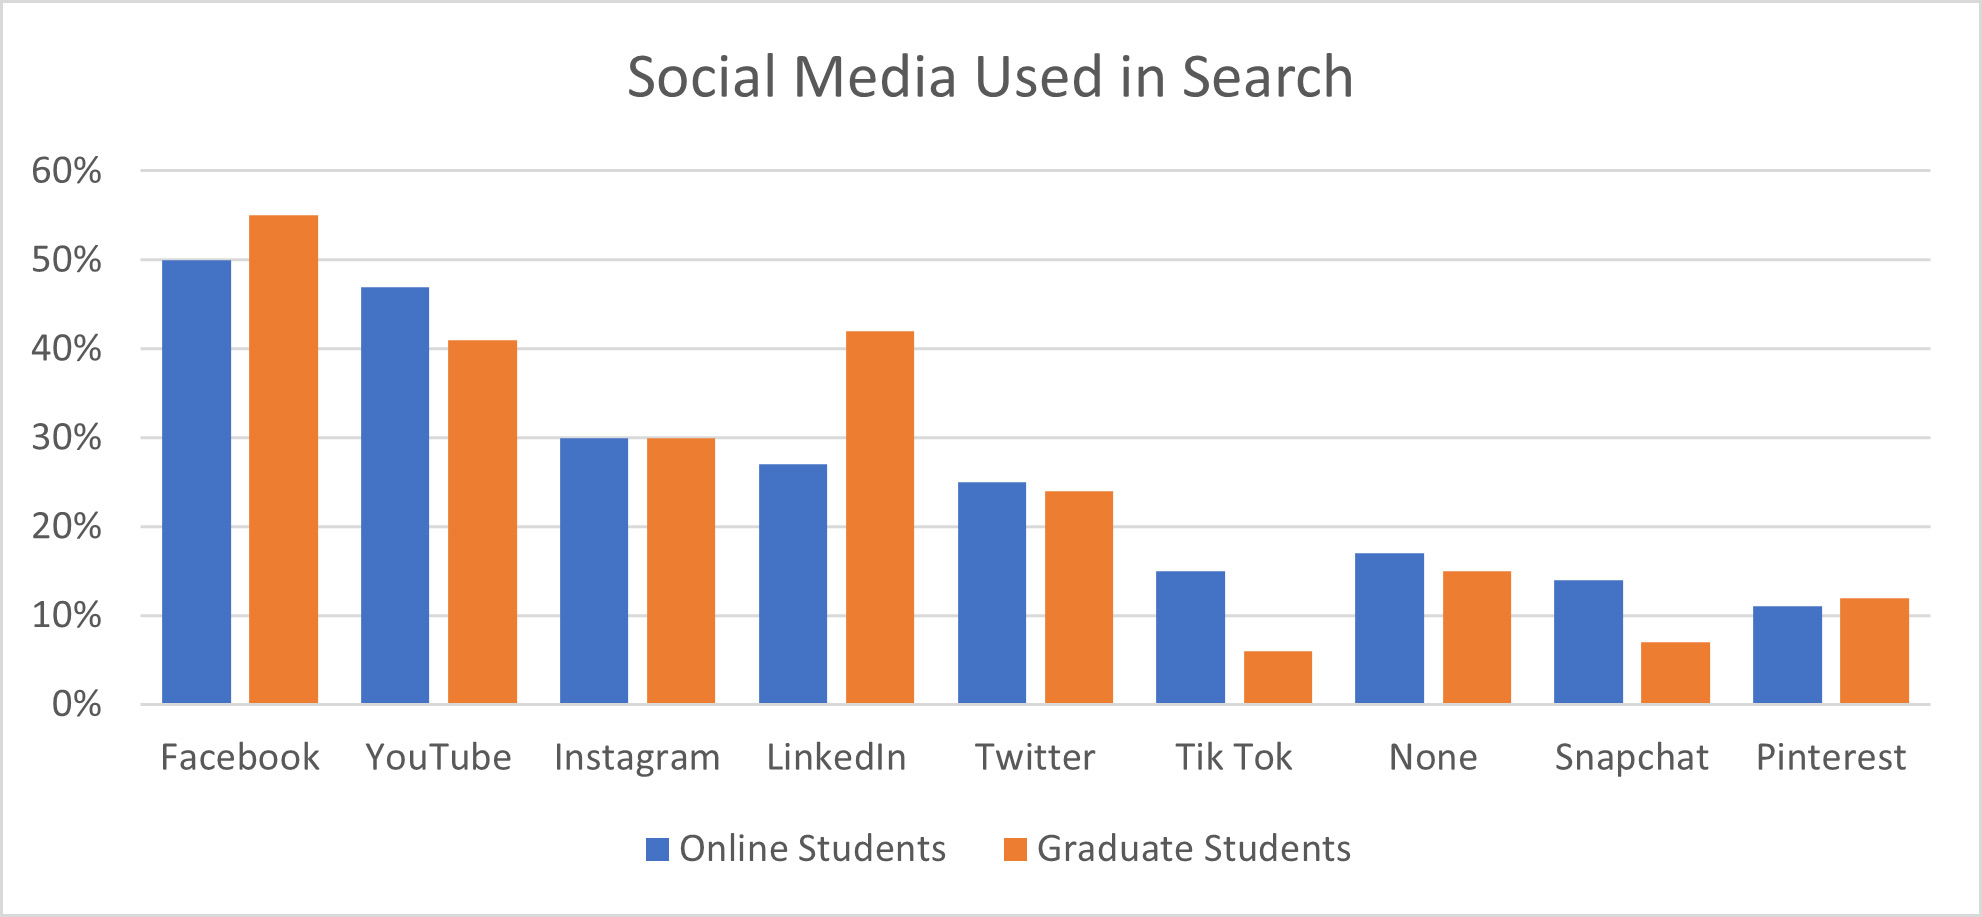 Social Media Used in Search by Graduate and Online Students